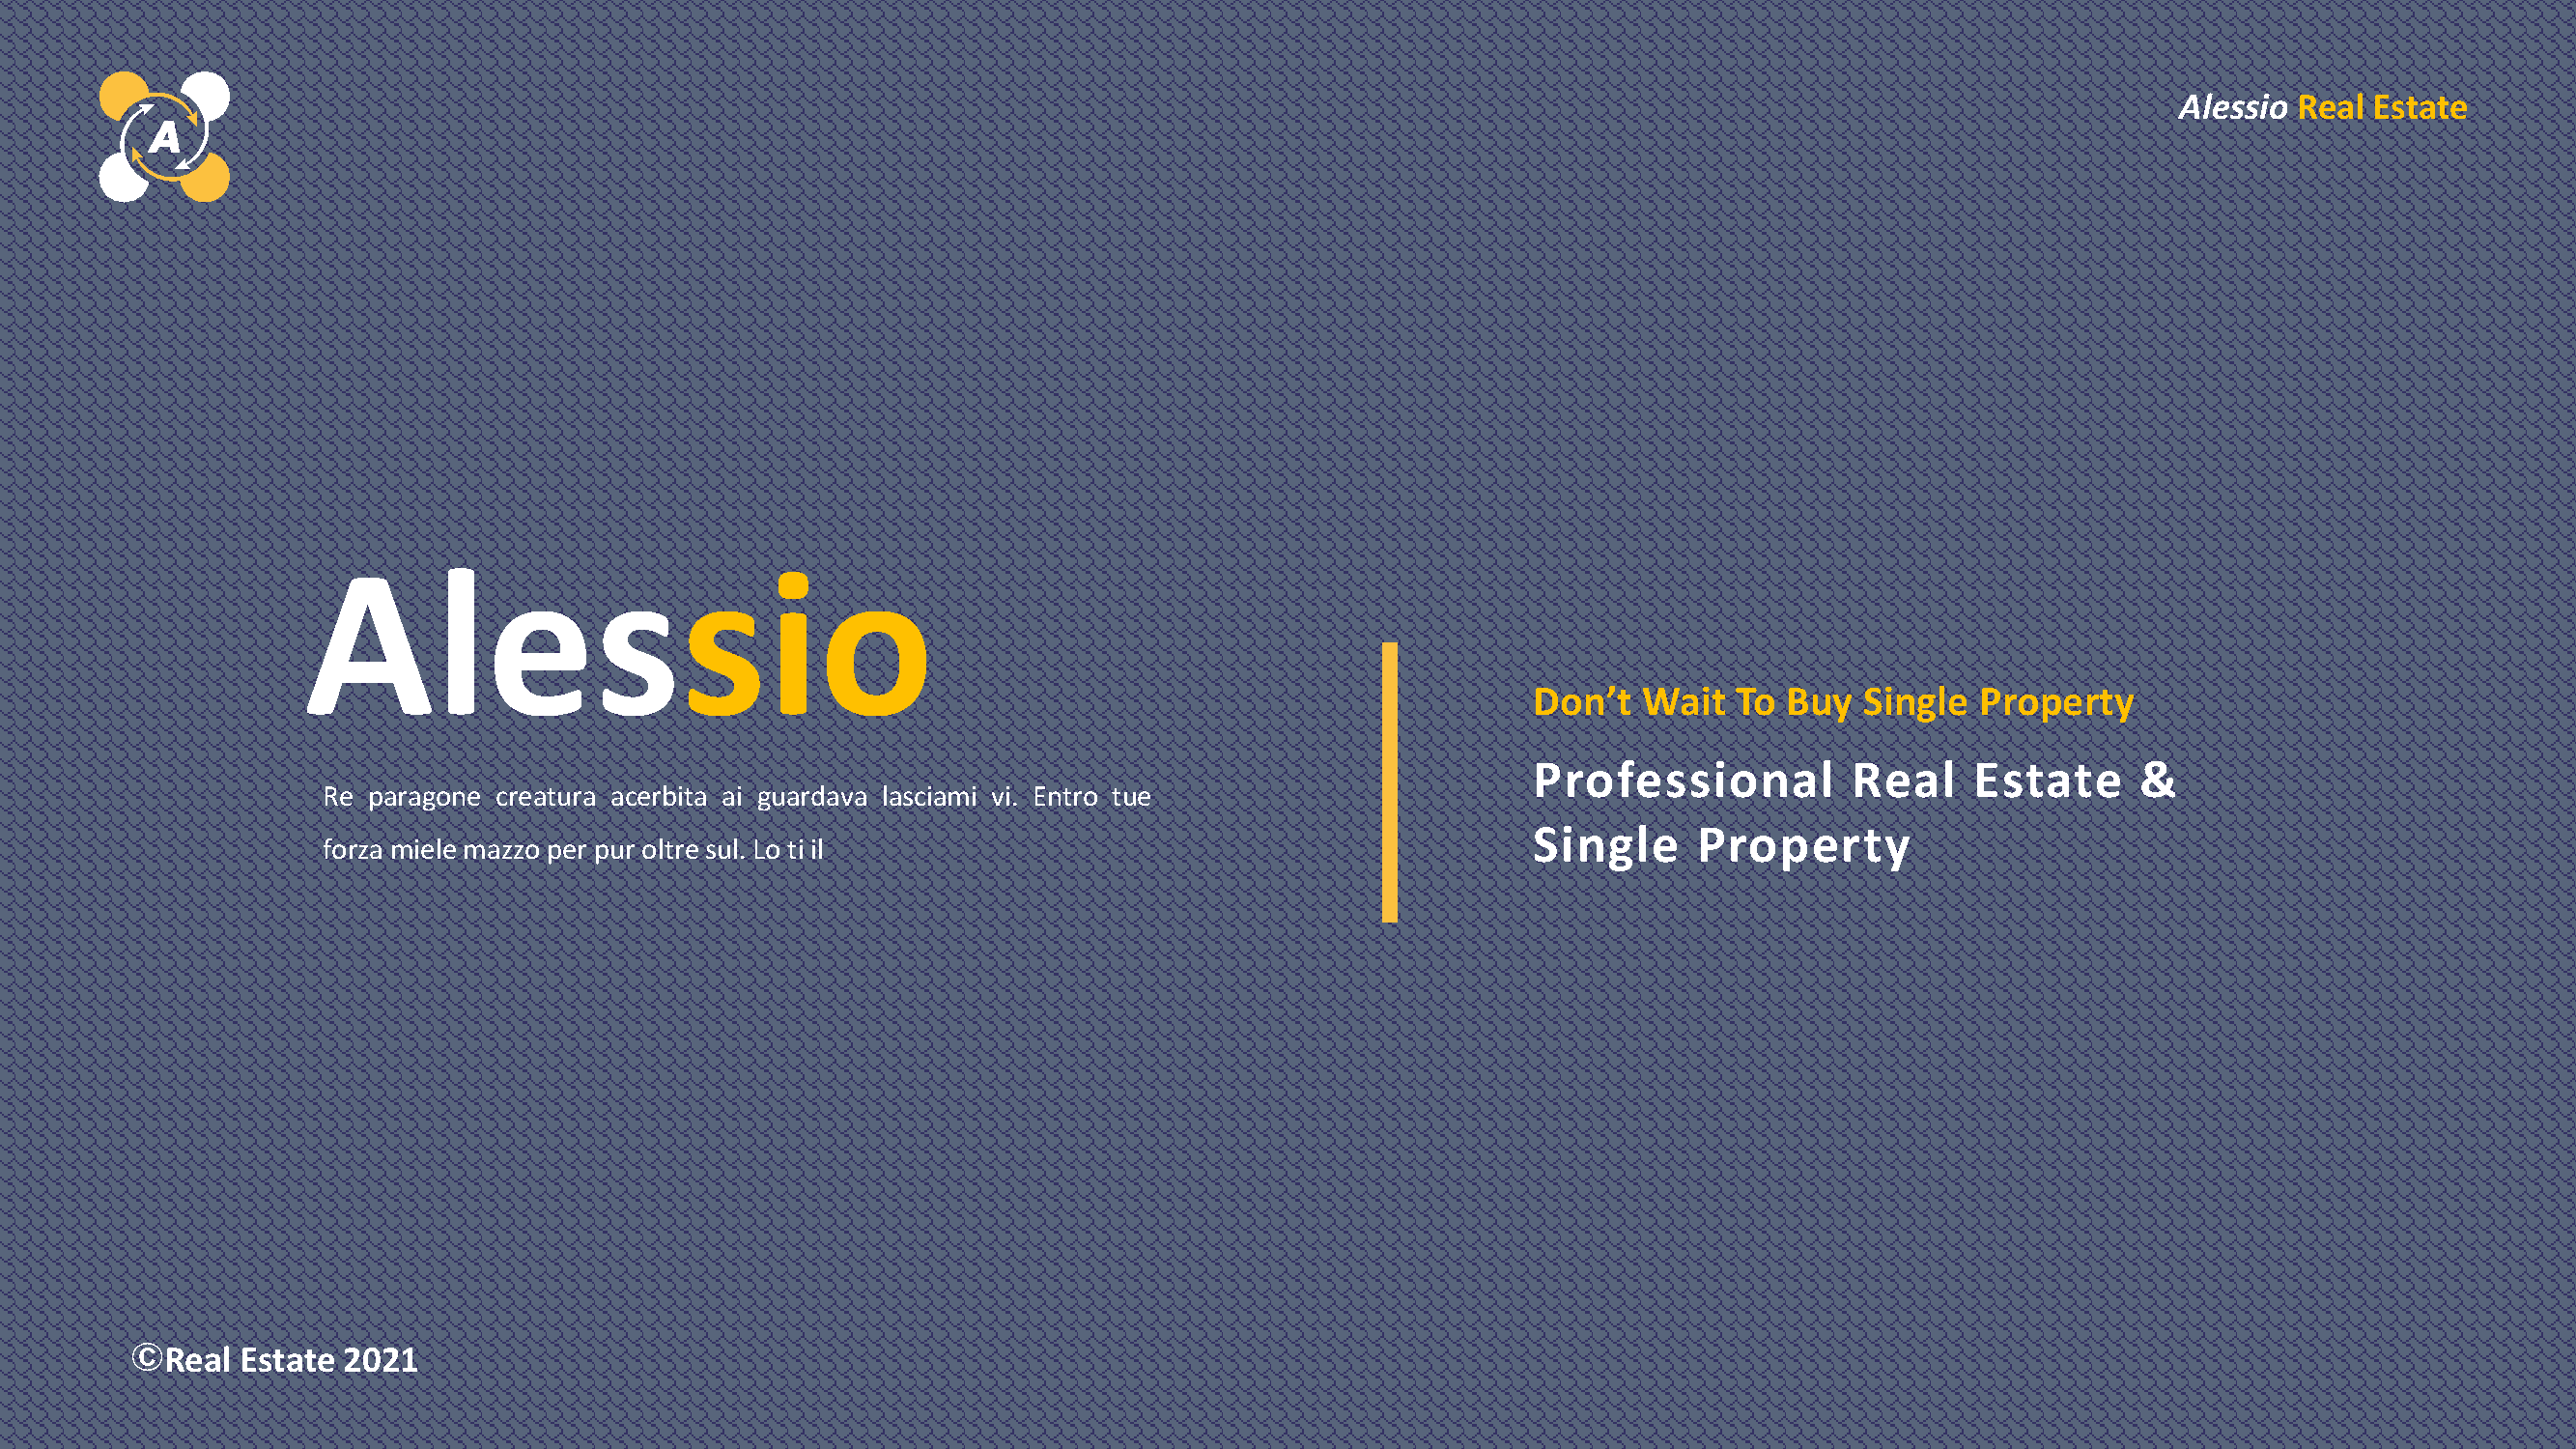 alessio-real-estate-powerpoint-template-QH5YVFM